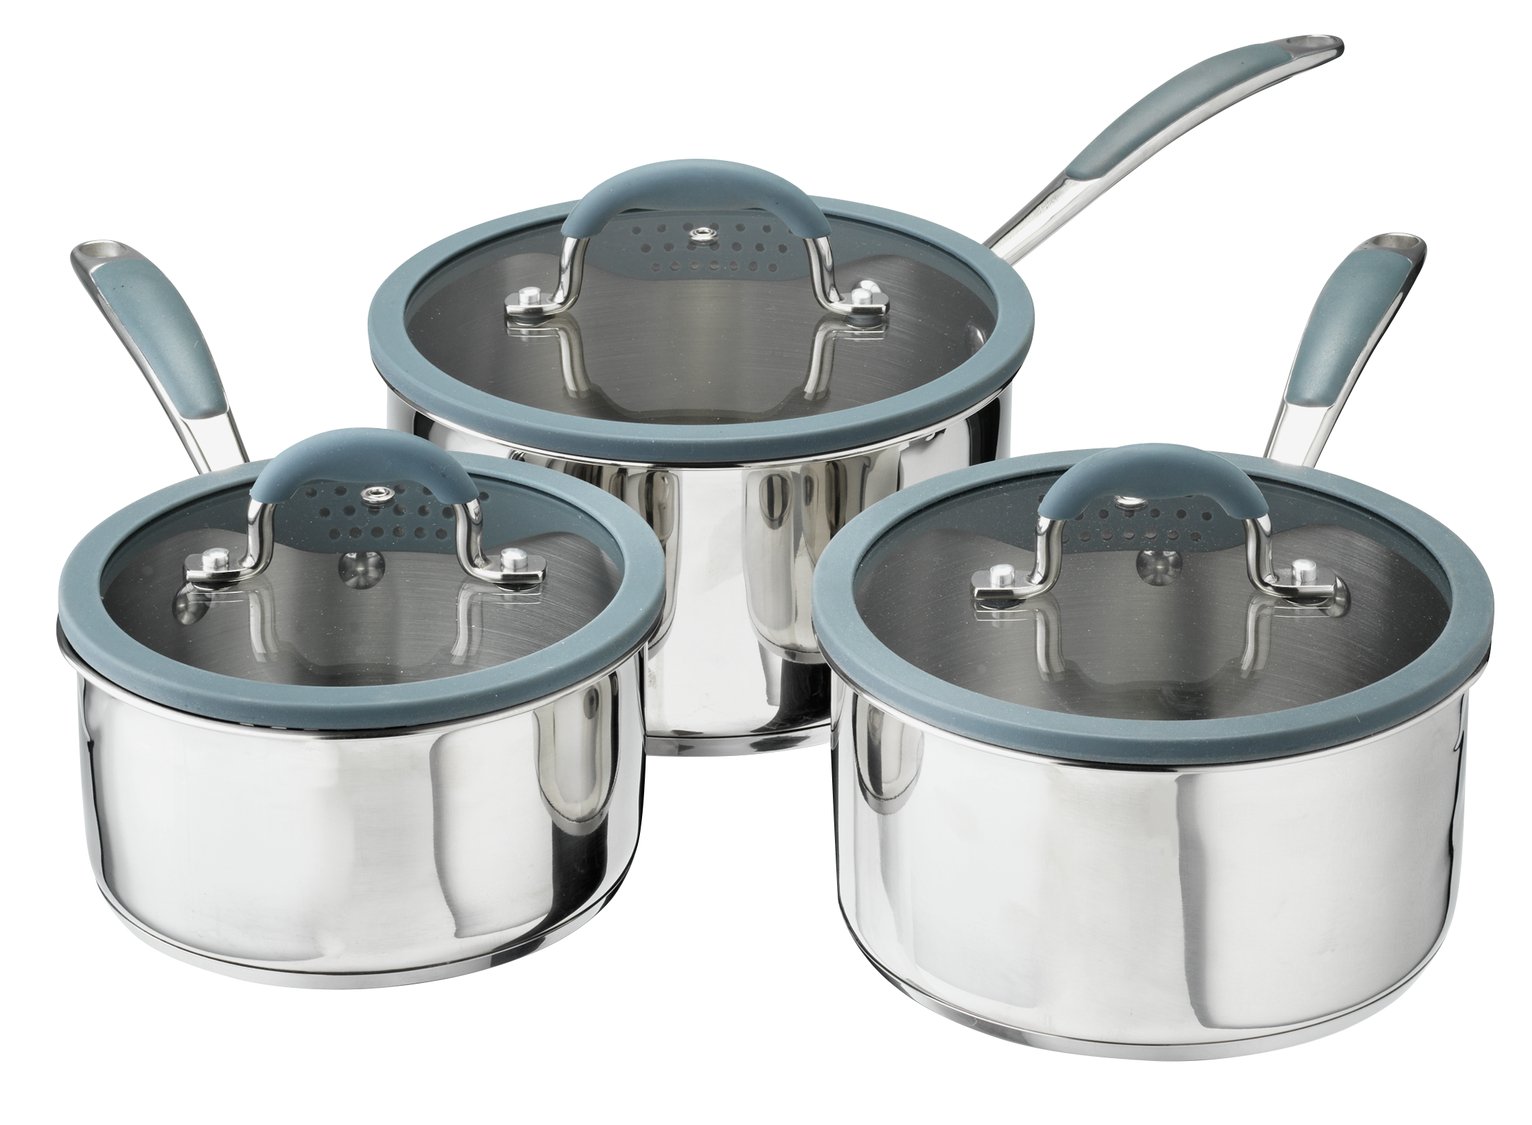 Sainsbury's Home 3 Piece Stainless Steel Pan Set review